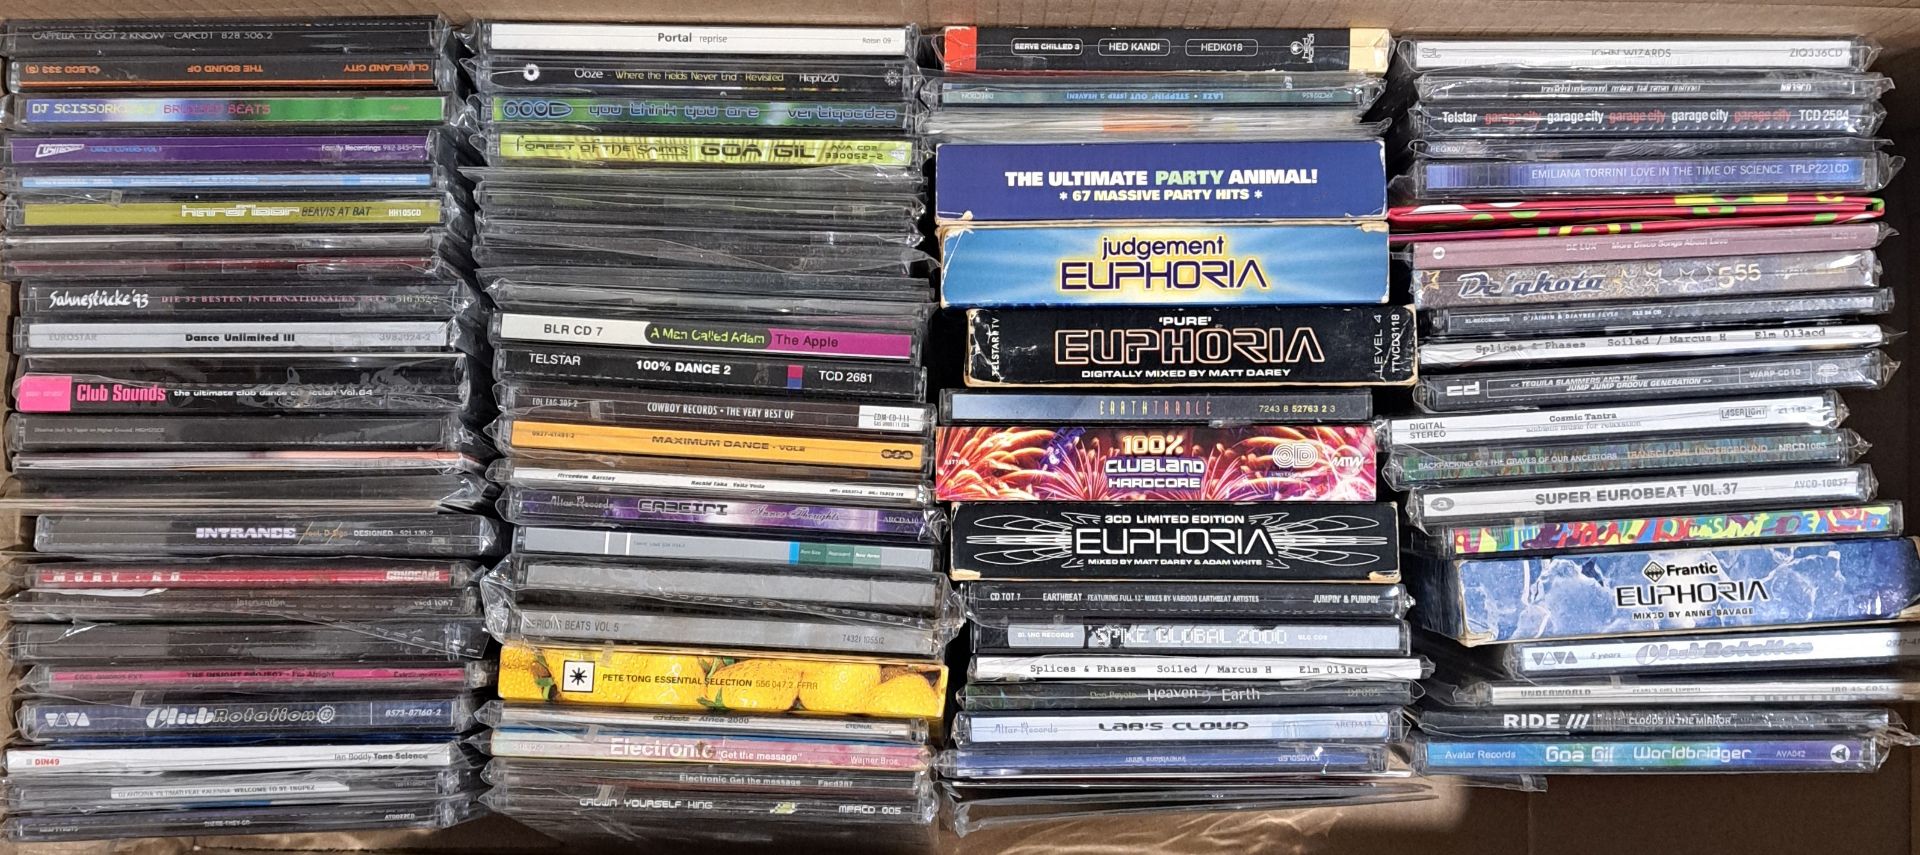 Dance, Electronic and similar, a group of CDs